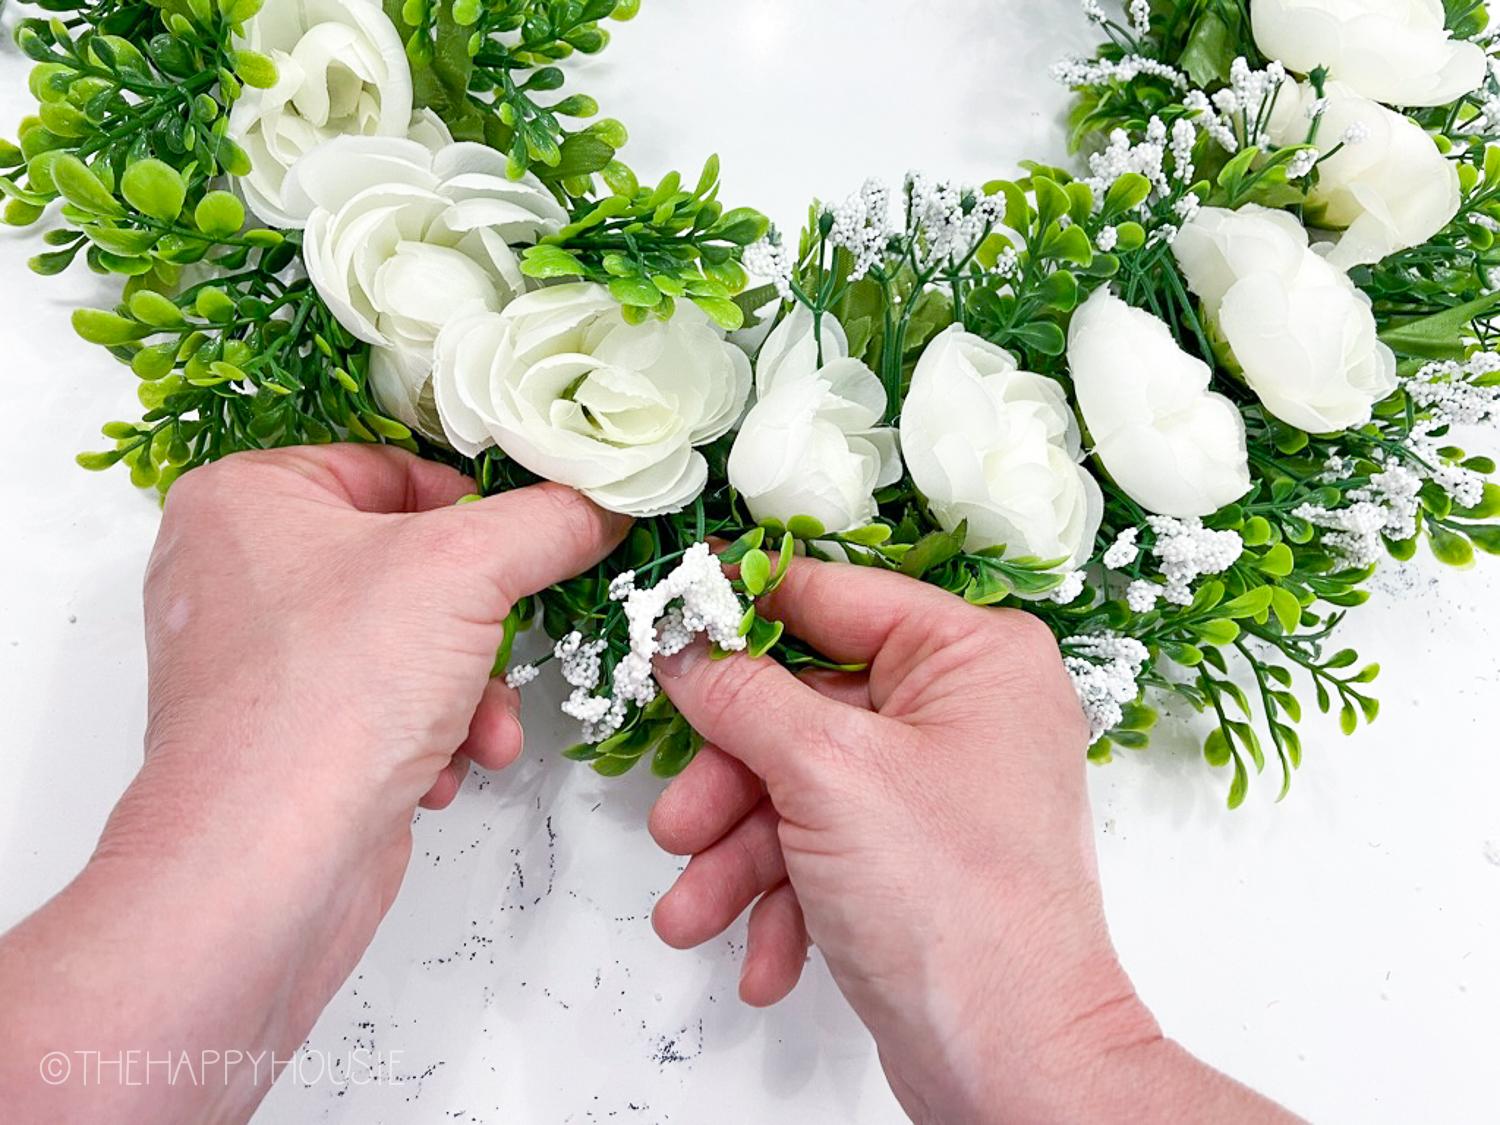 The white babys breath on the wreath.